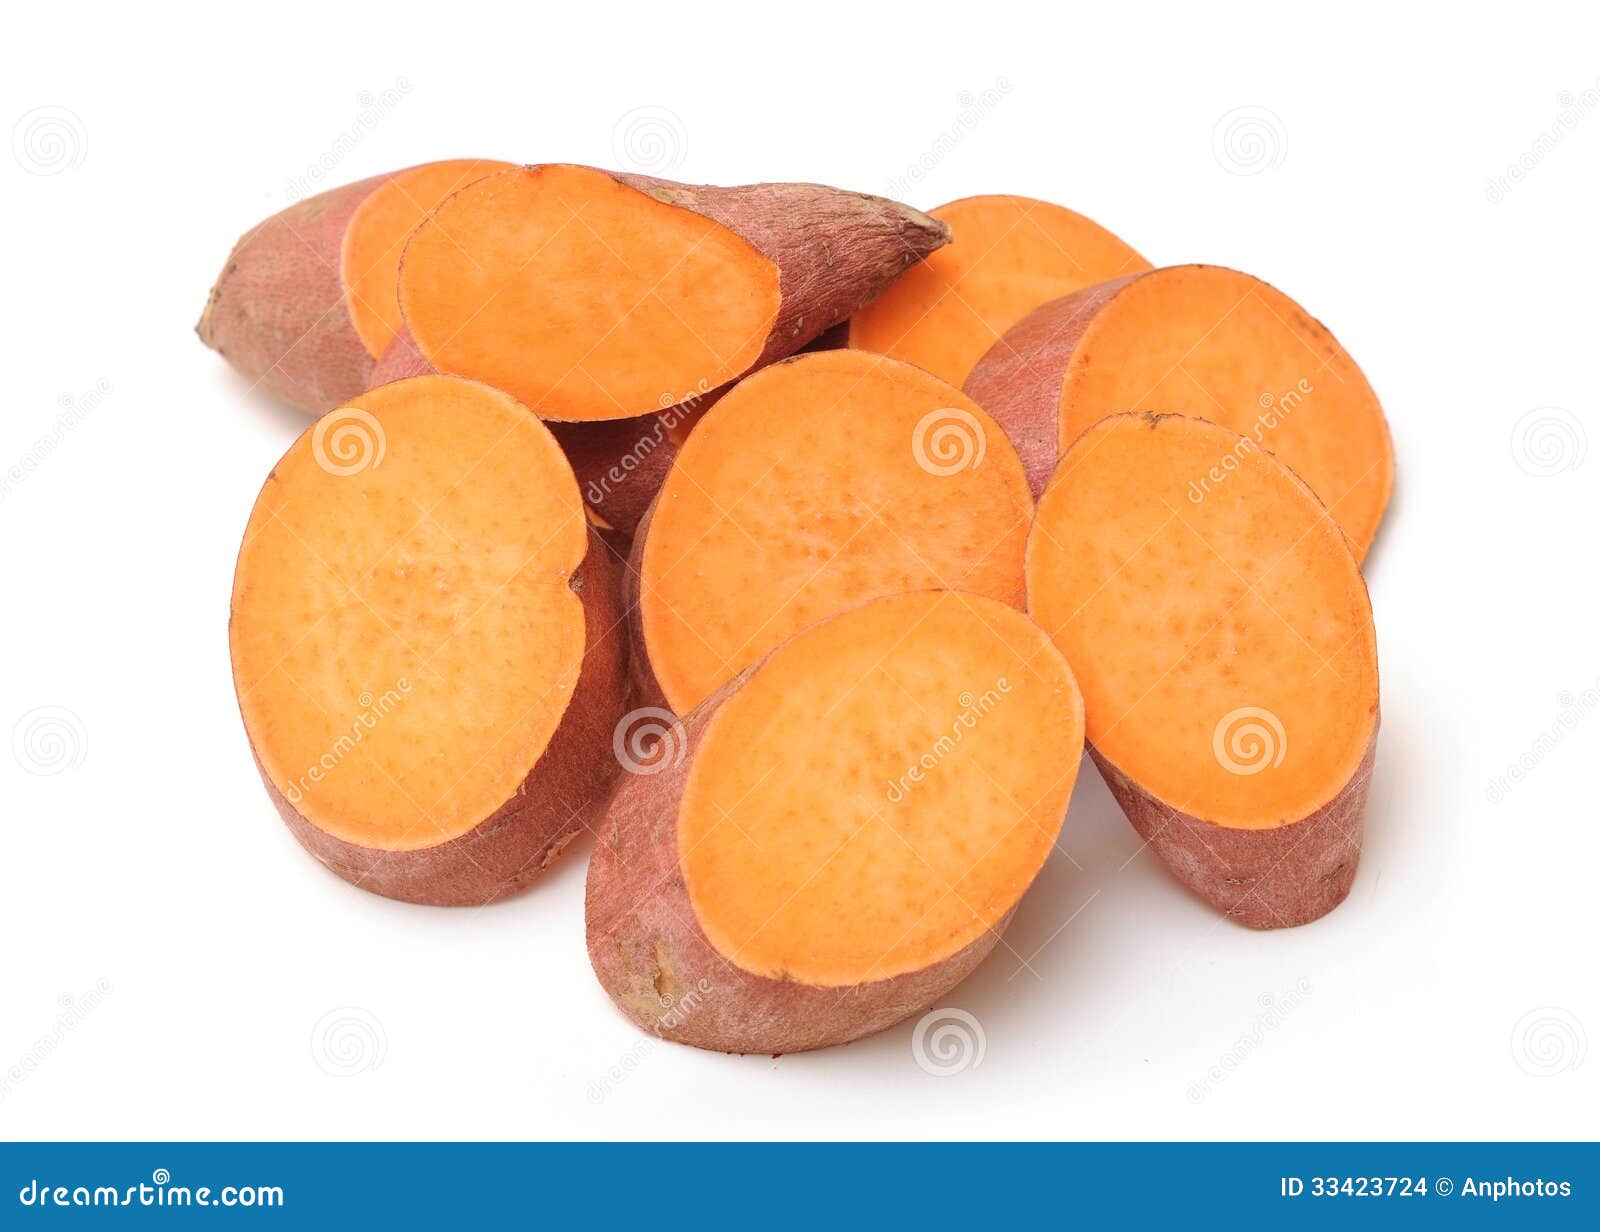 clipart of yam - photo #48